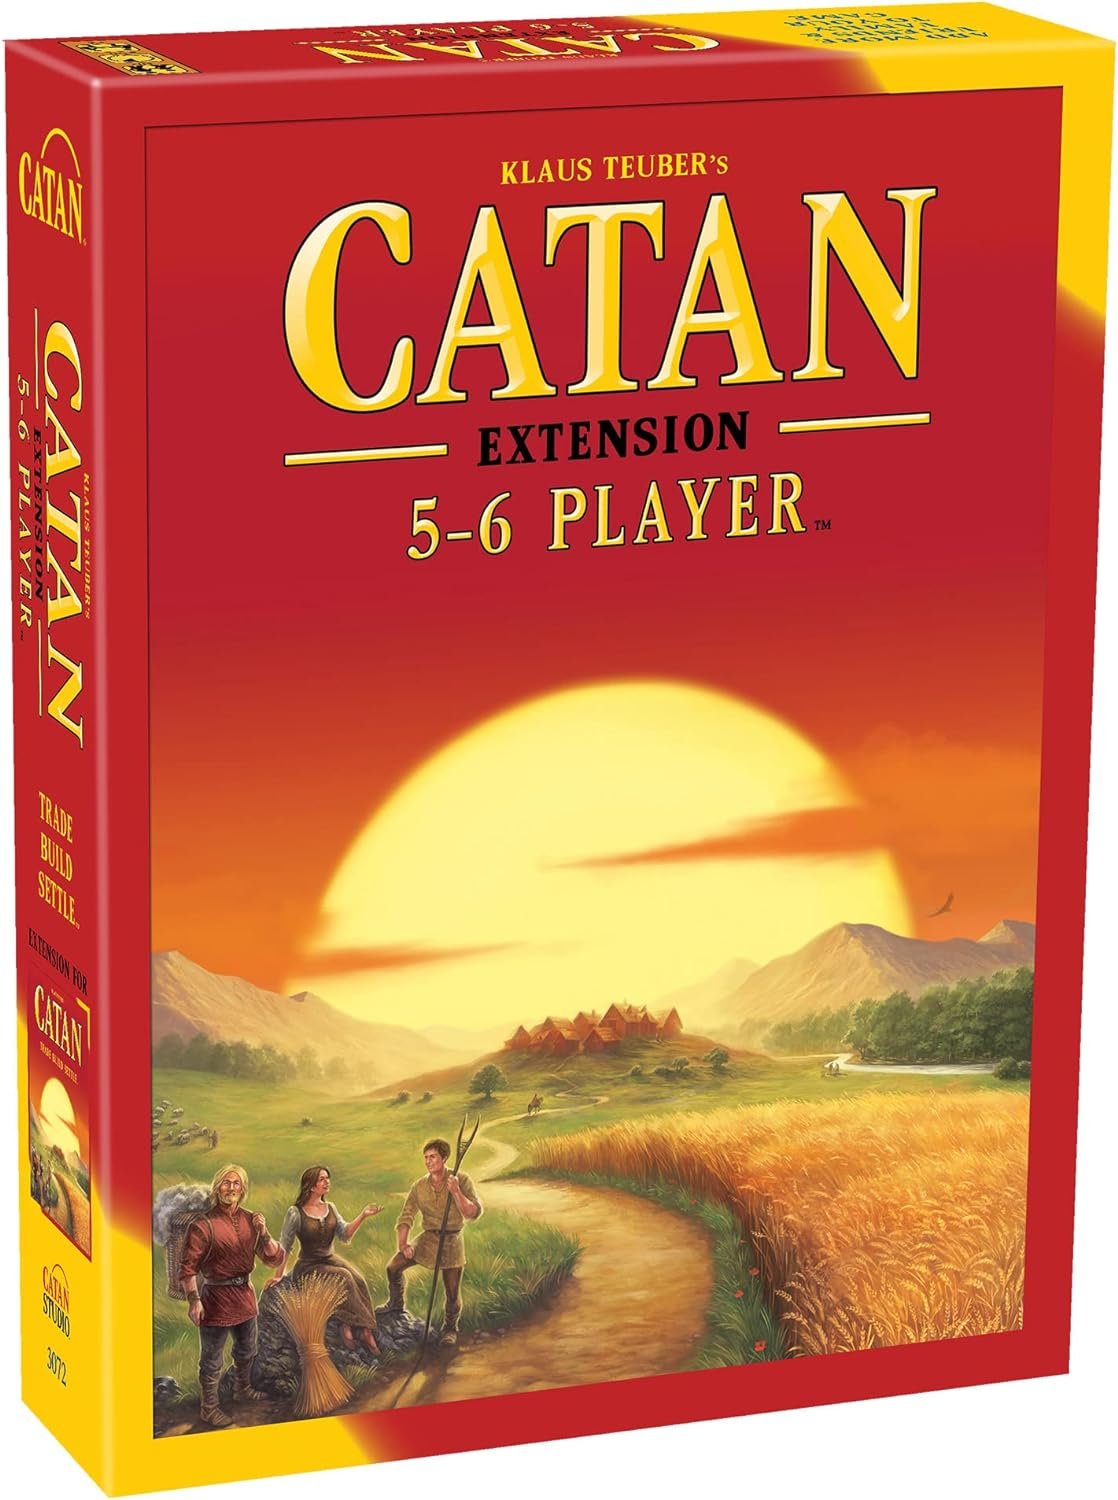 CATAN Board Game Extension Review